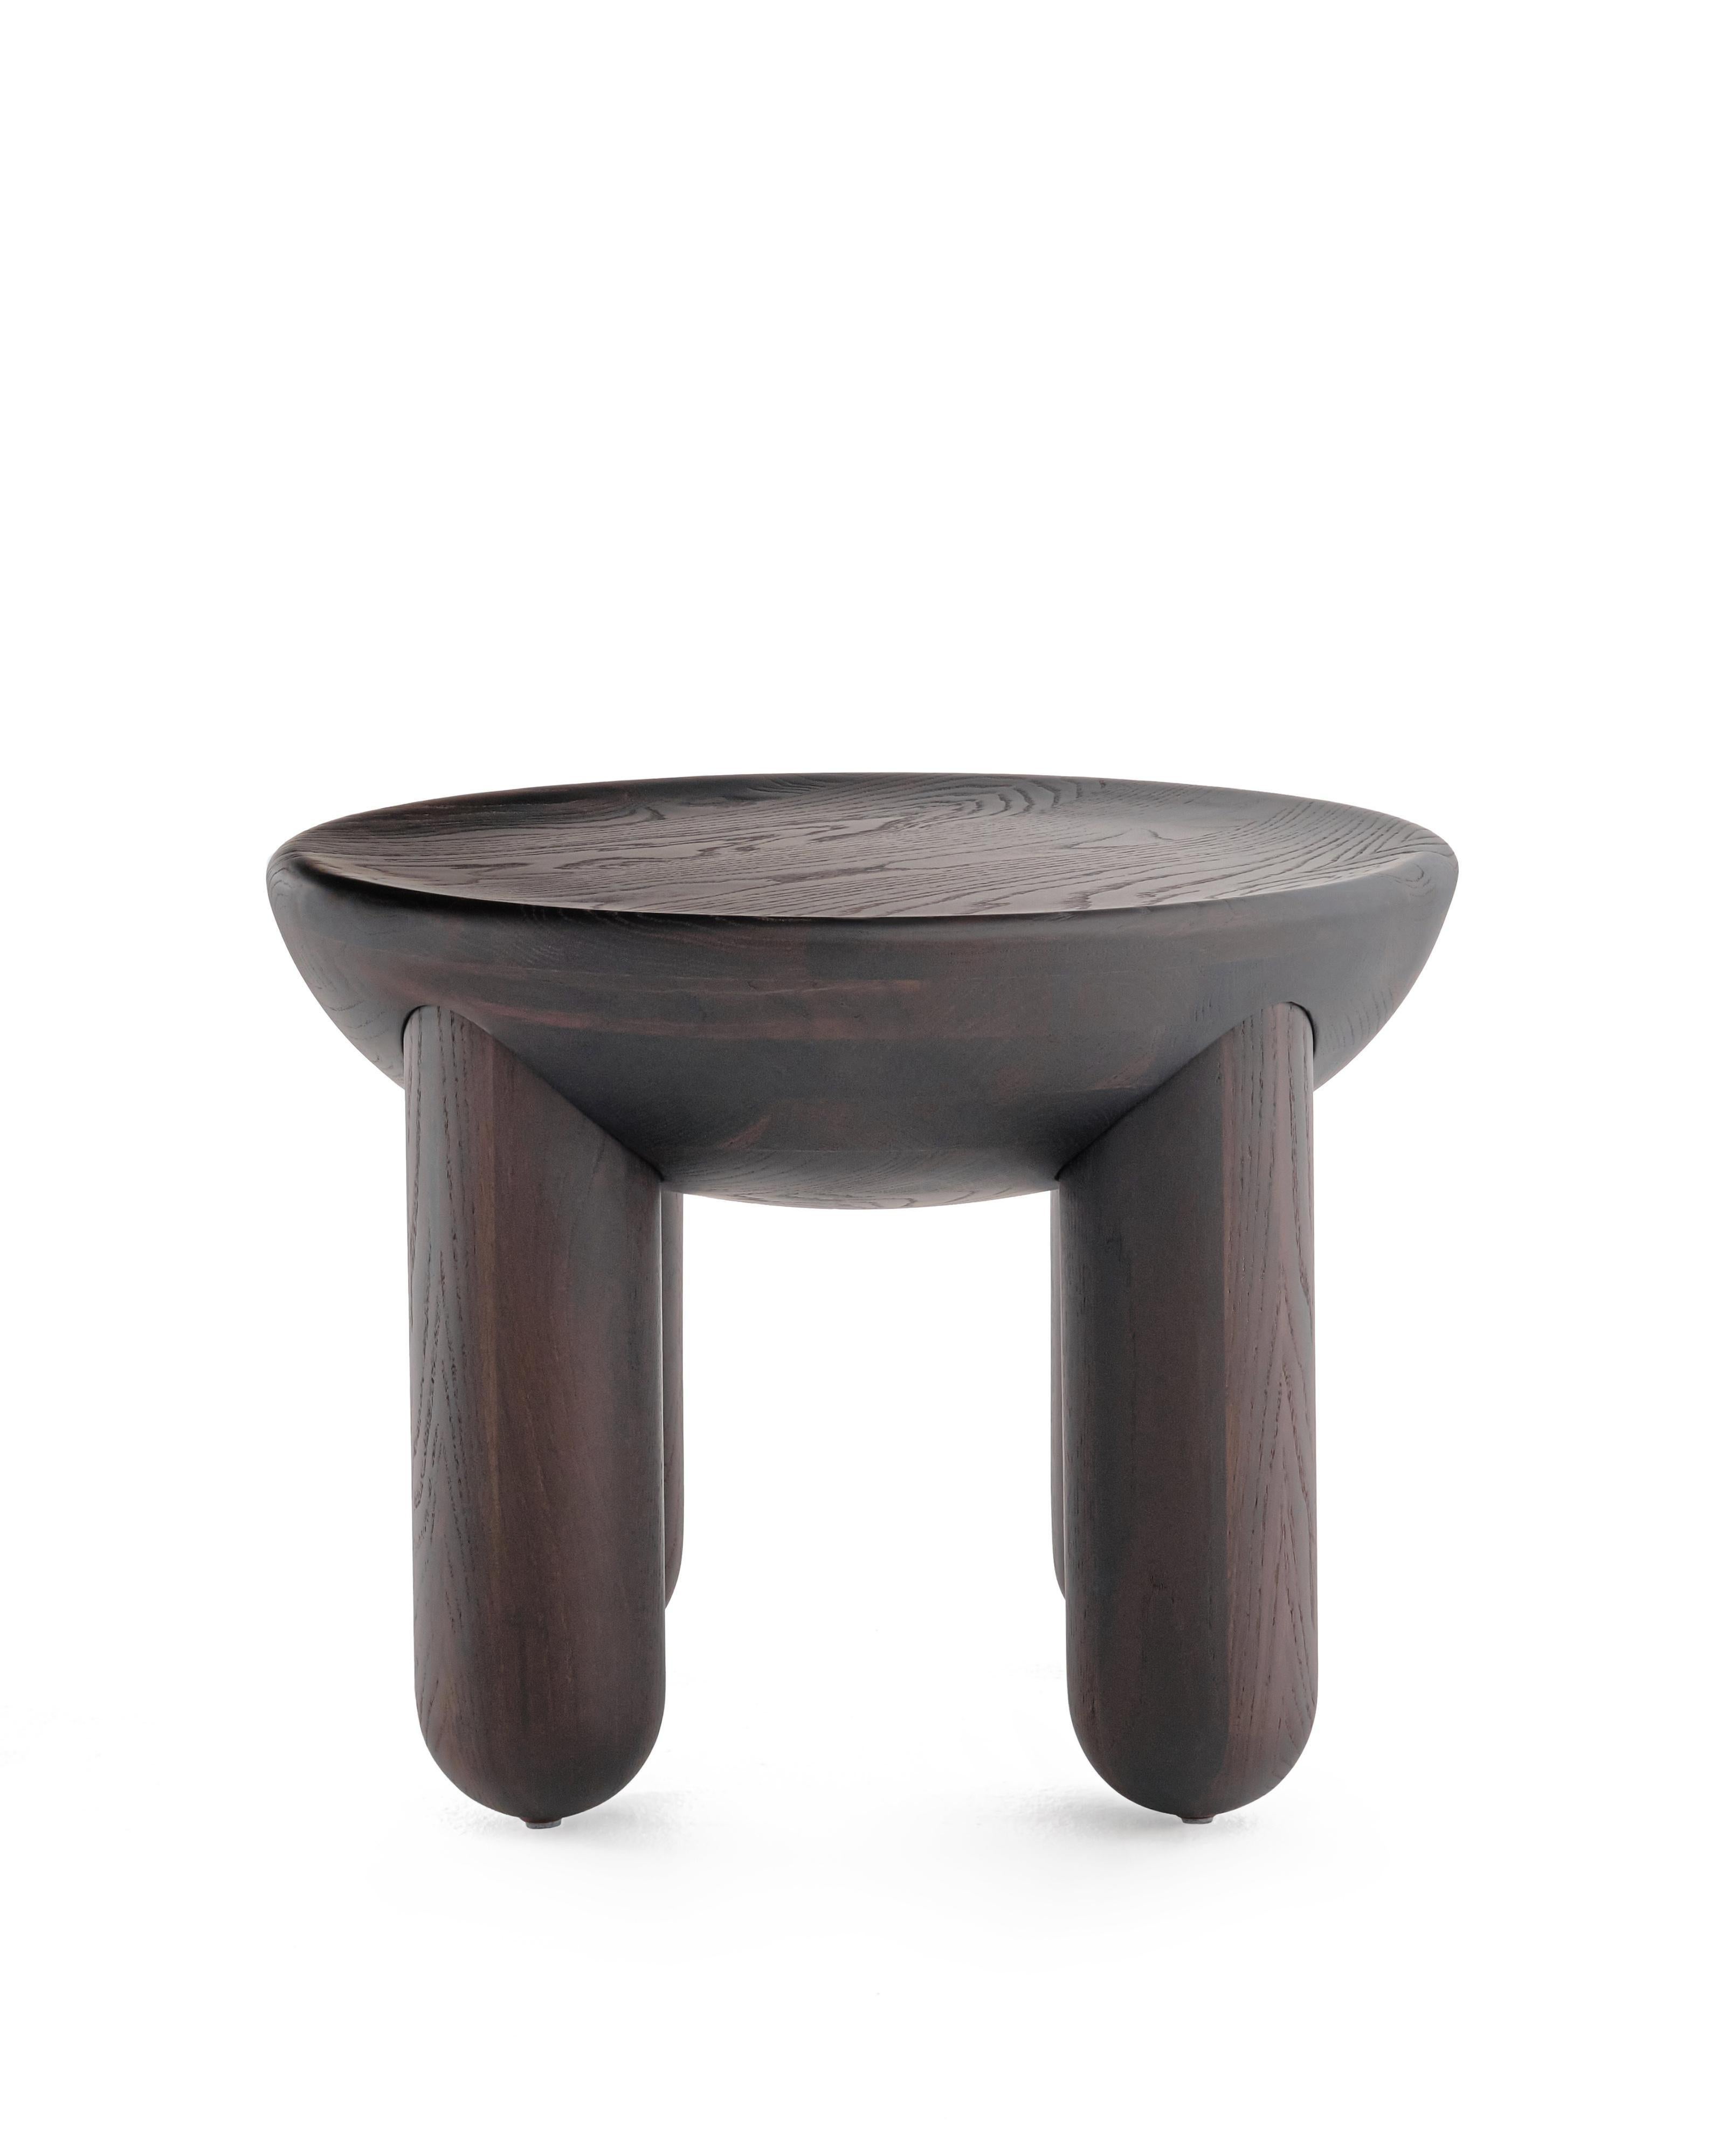 Ukrainian Contemporary Wooden Coffee or Side Table 'Freyja 2' by Noom, Thermo Ash For Sale